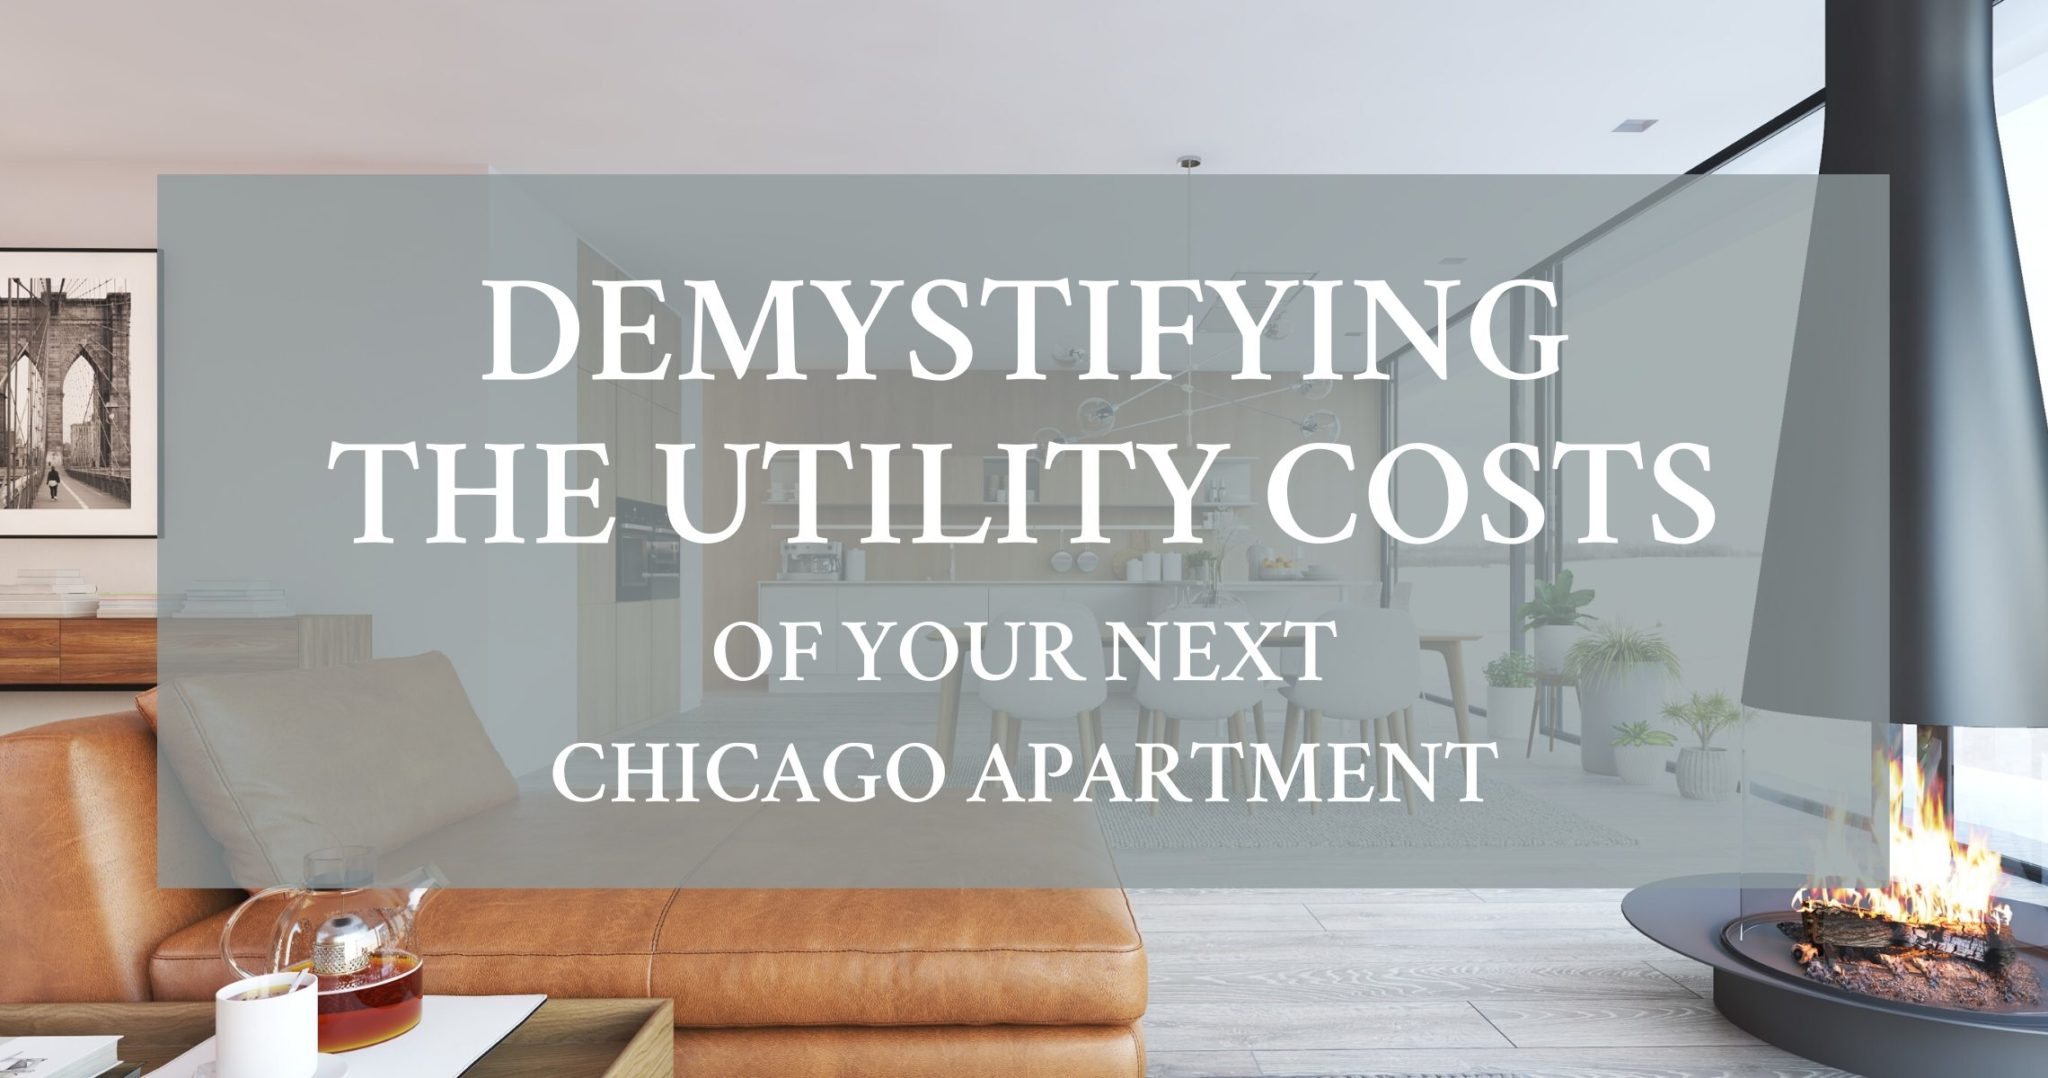 Demystifying the Utility Costs of Your Next Chicago Apartment